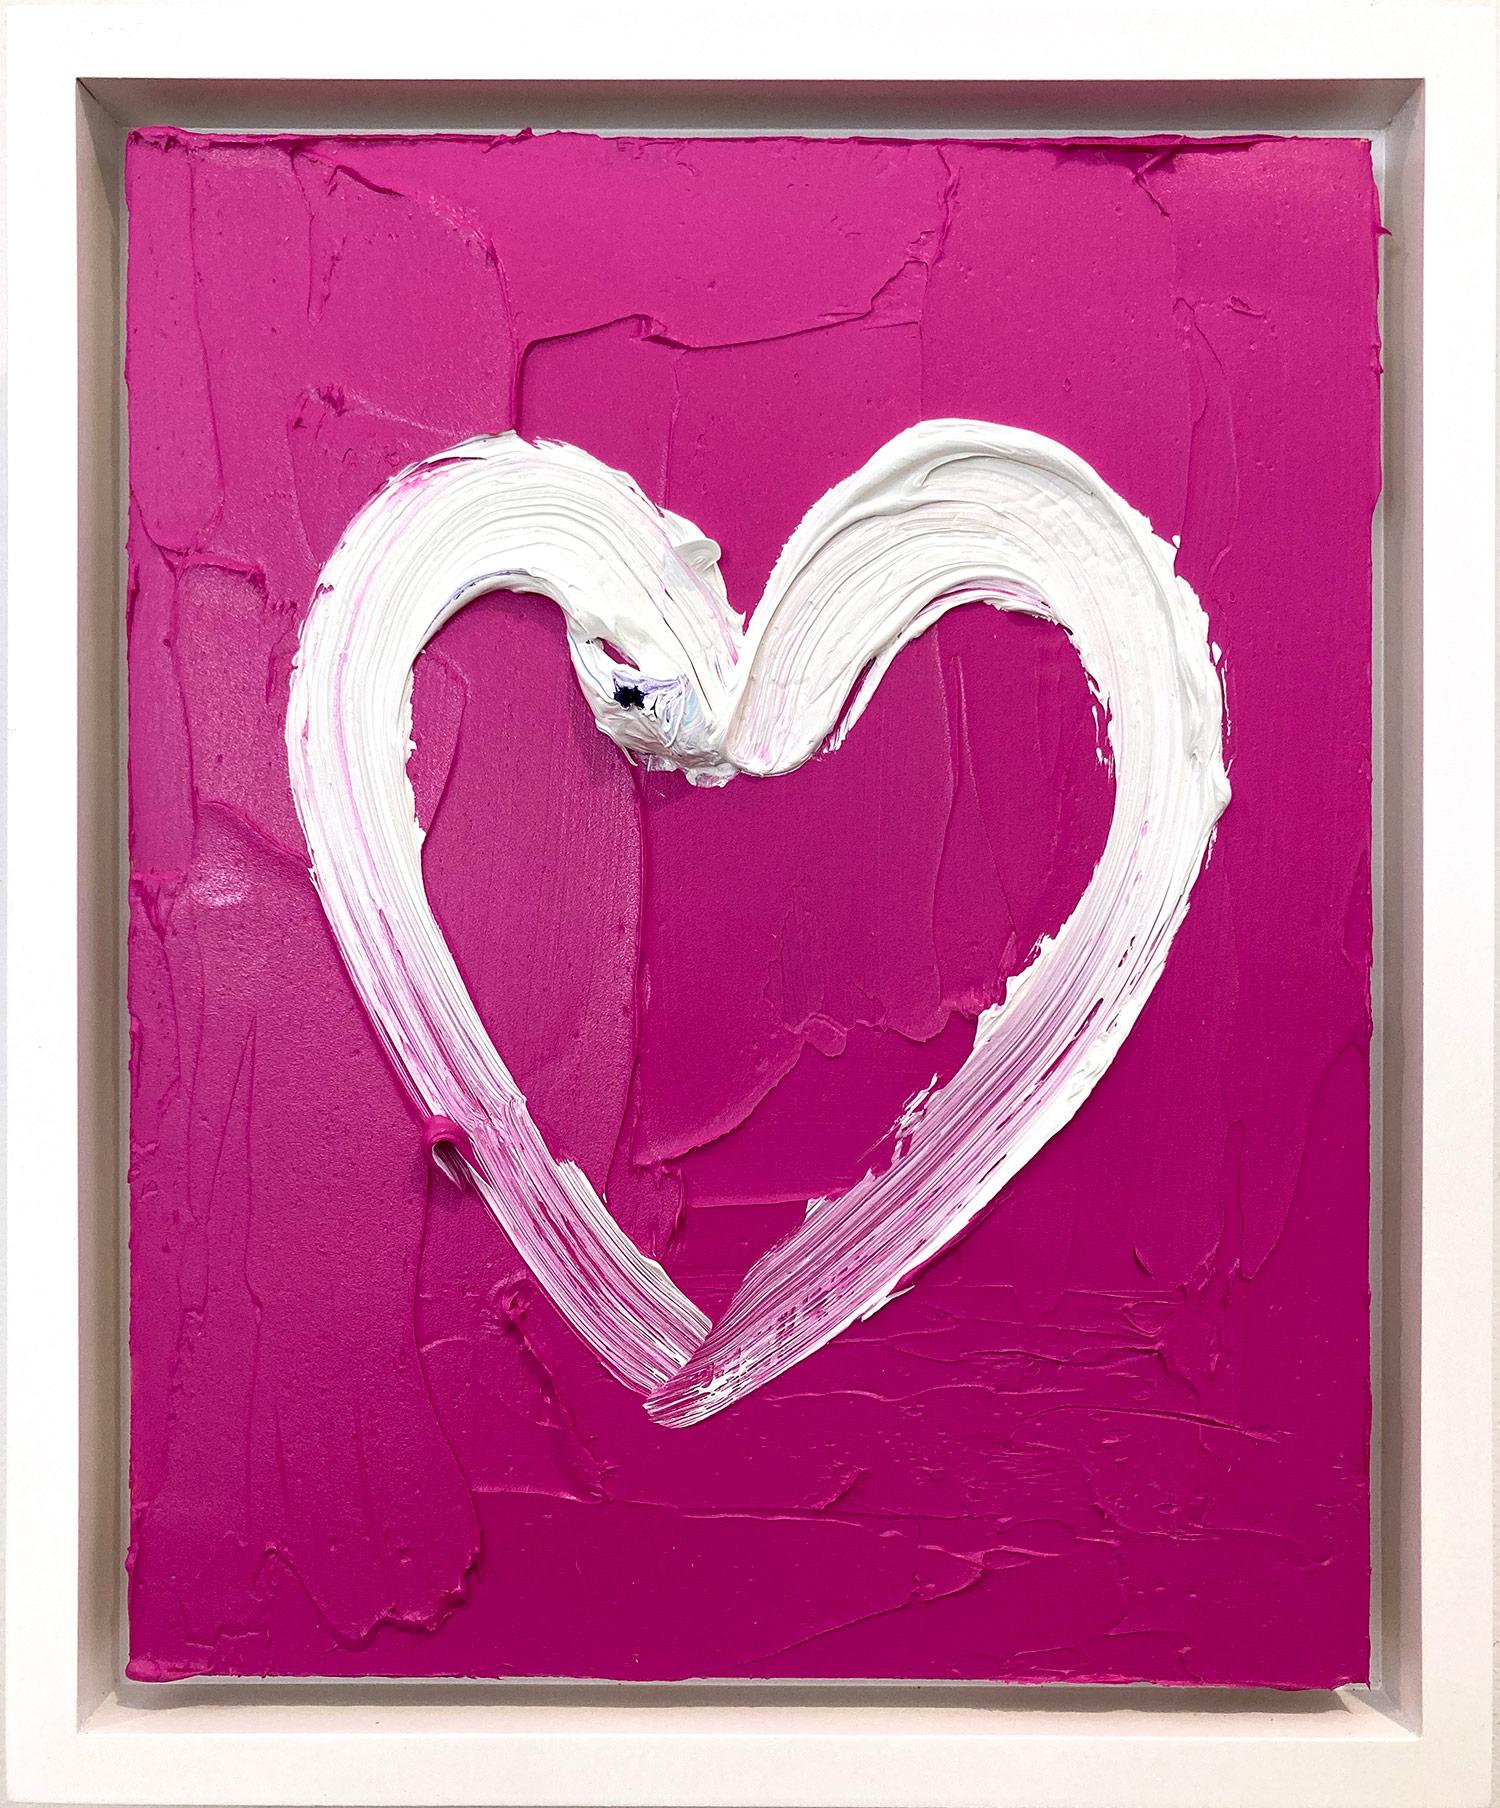 Cindy Shaoul Abstract Painting - "My Hot Pink Heart" Contemporary Pop Oil Painting on Wood White Floater Frame